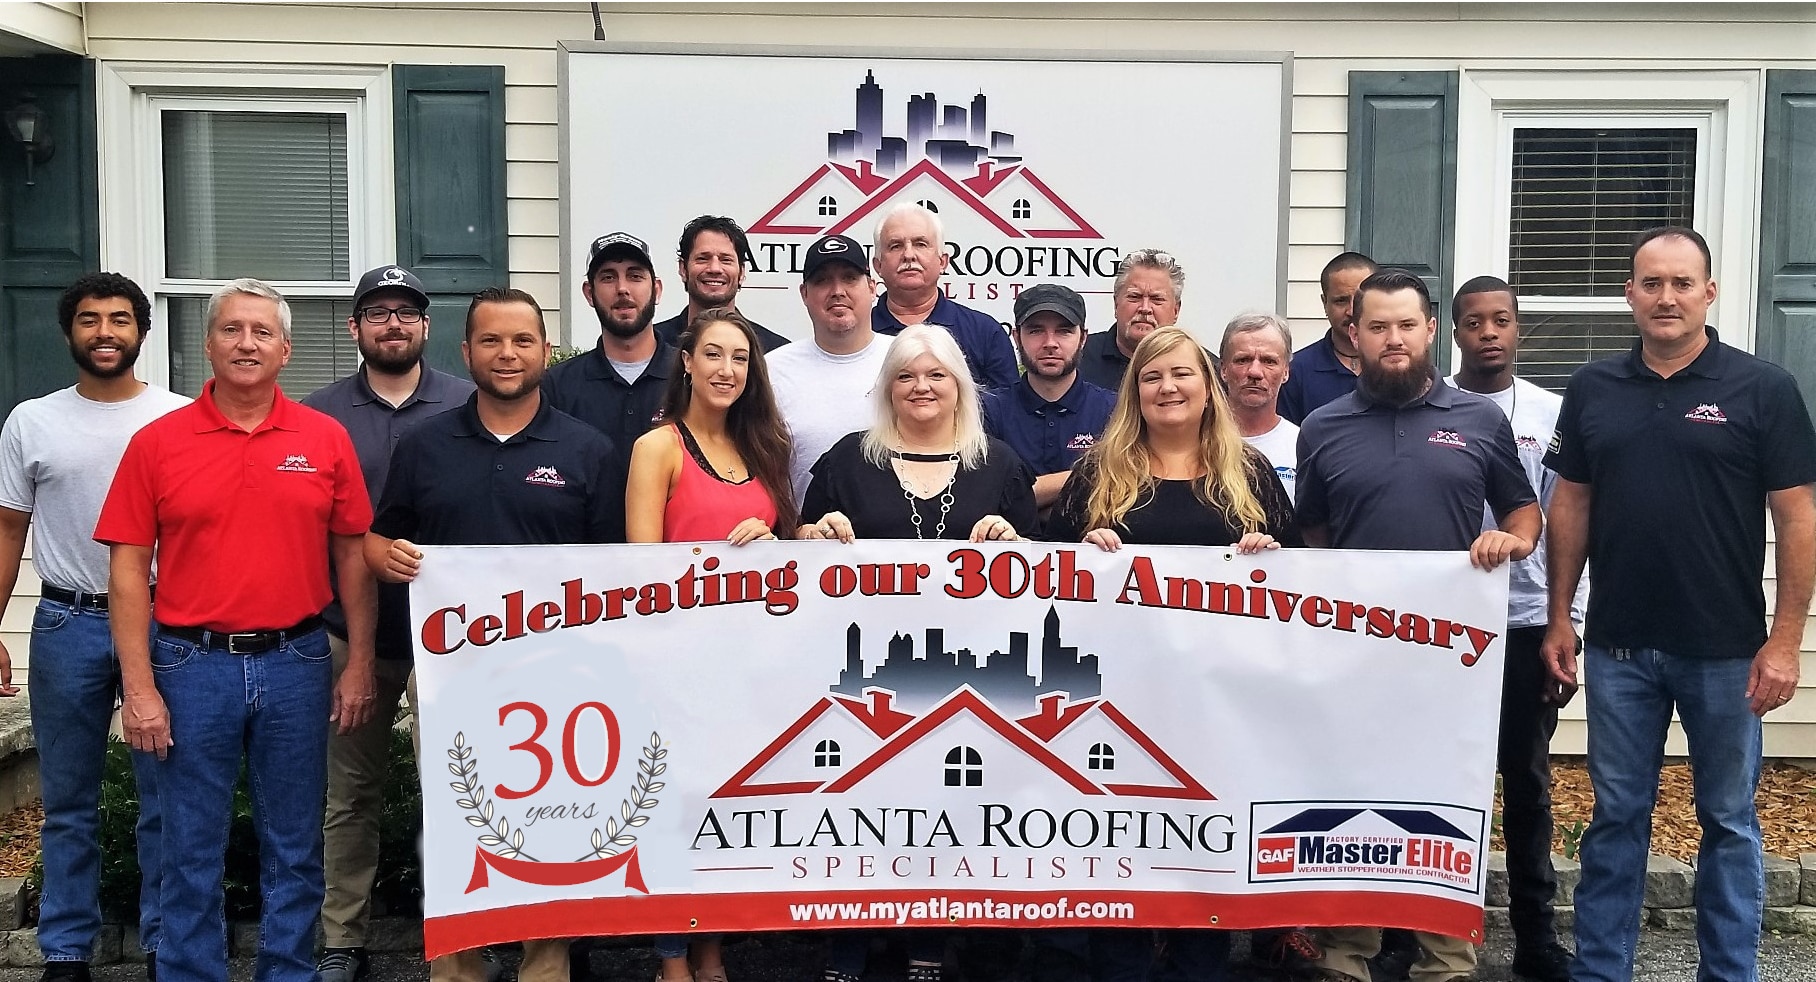 Mark Rutherford and team from Atlanta Roofing Specialist